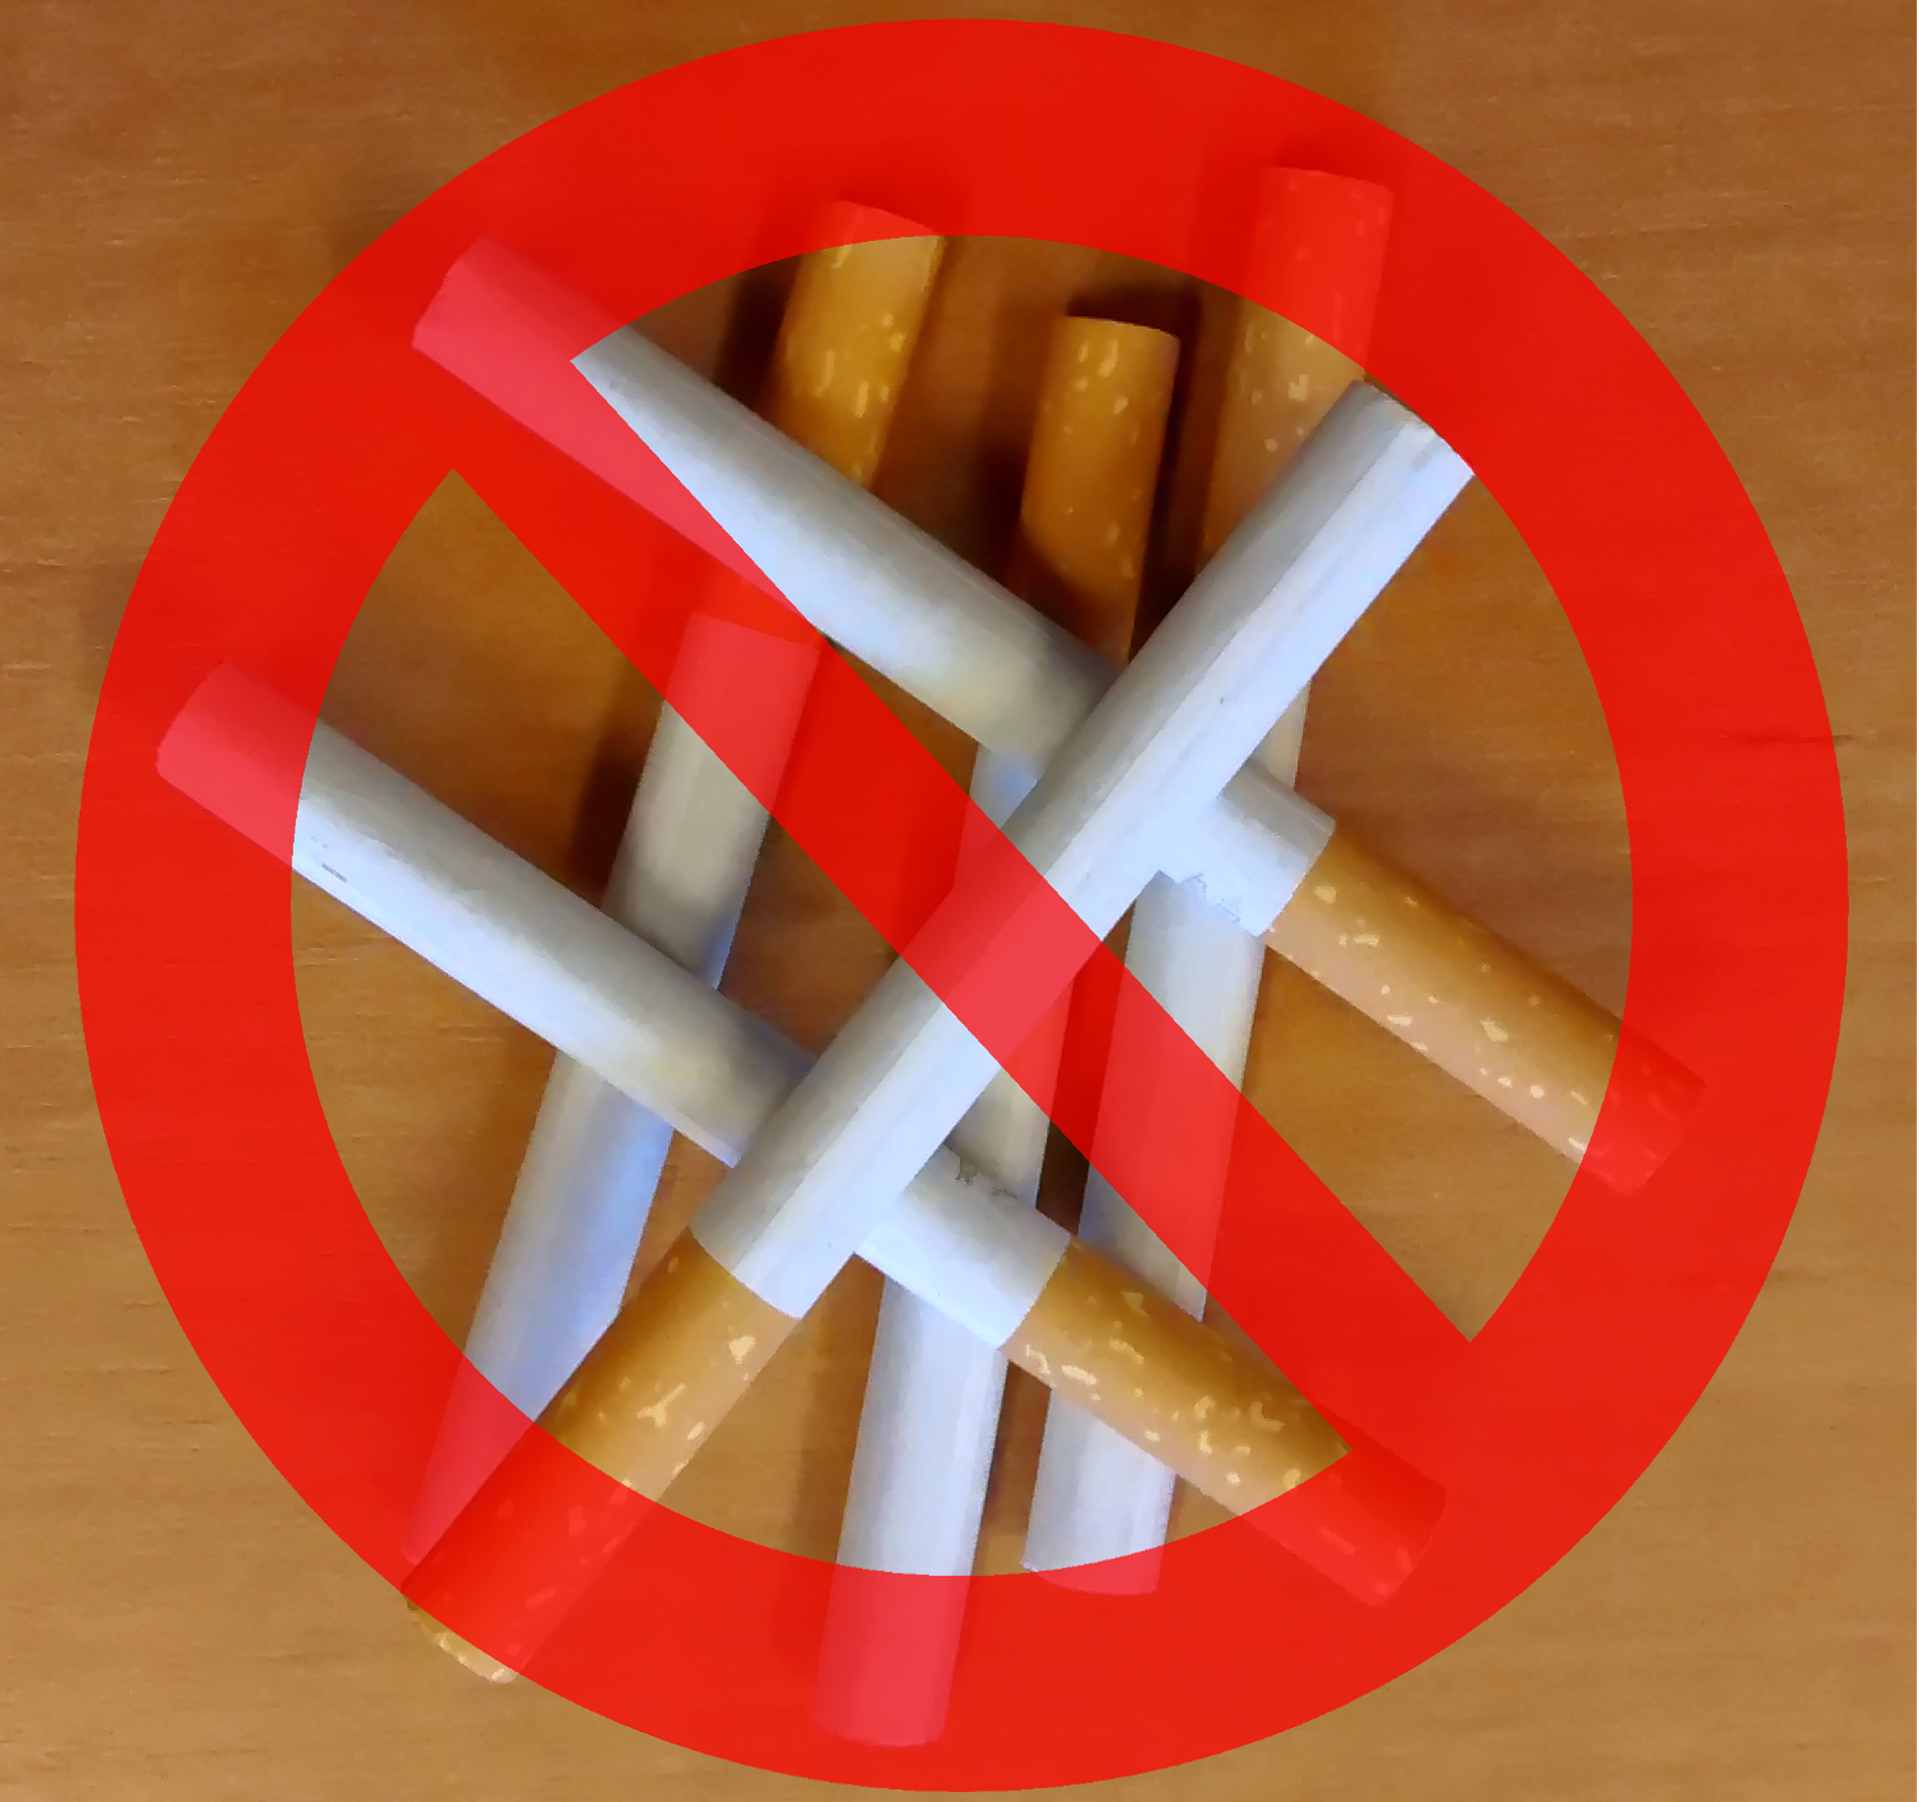 How To Quit Smoking In A Smart Way